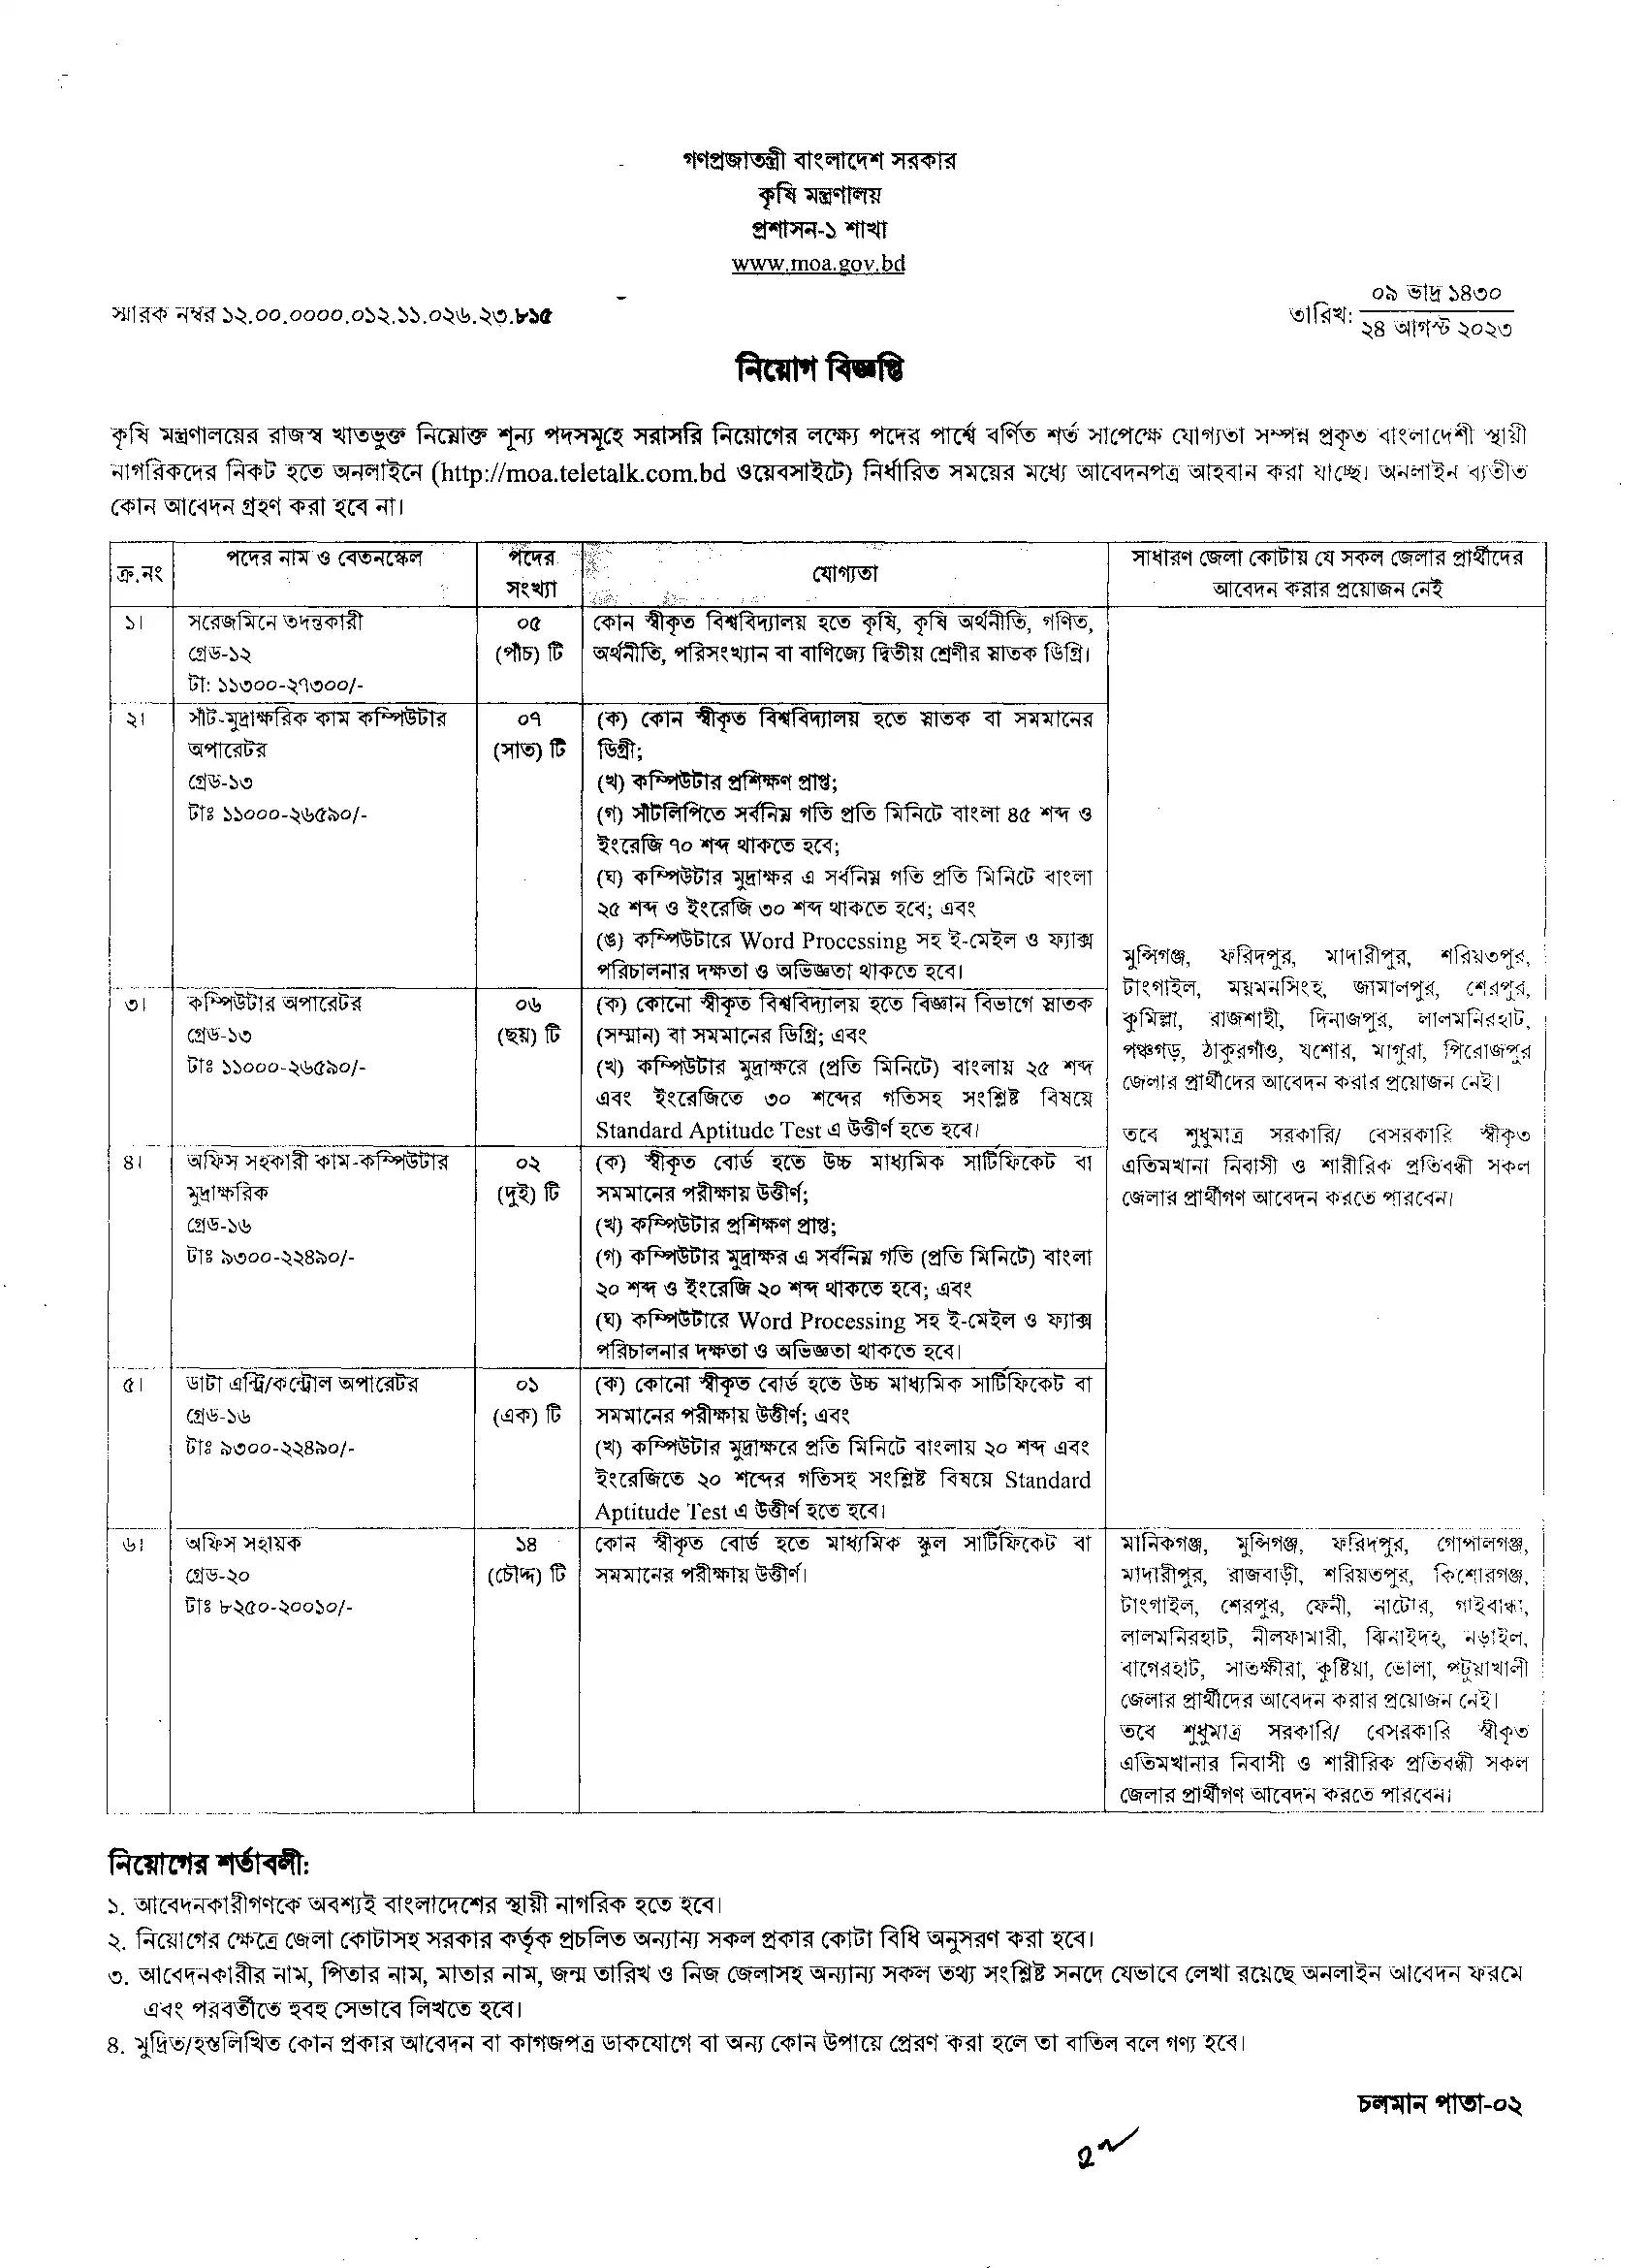 Ministry of Agriculture job circular